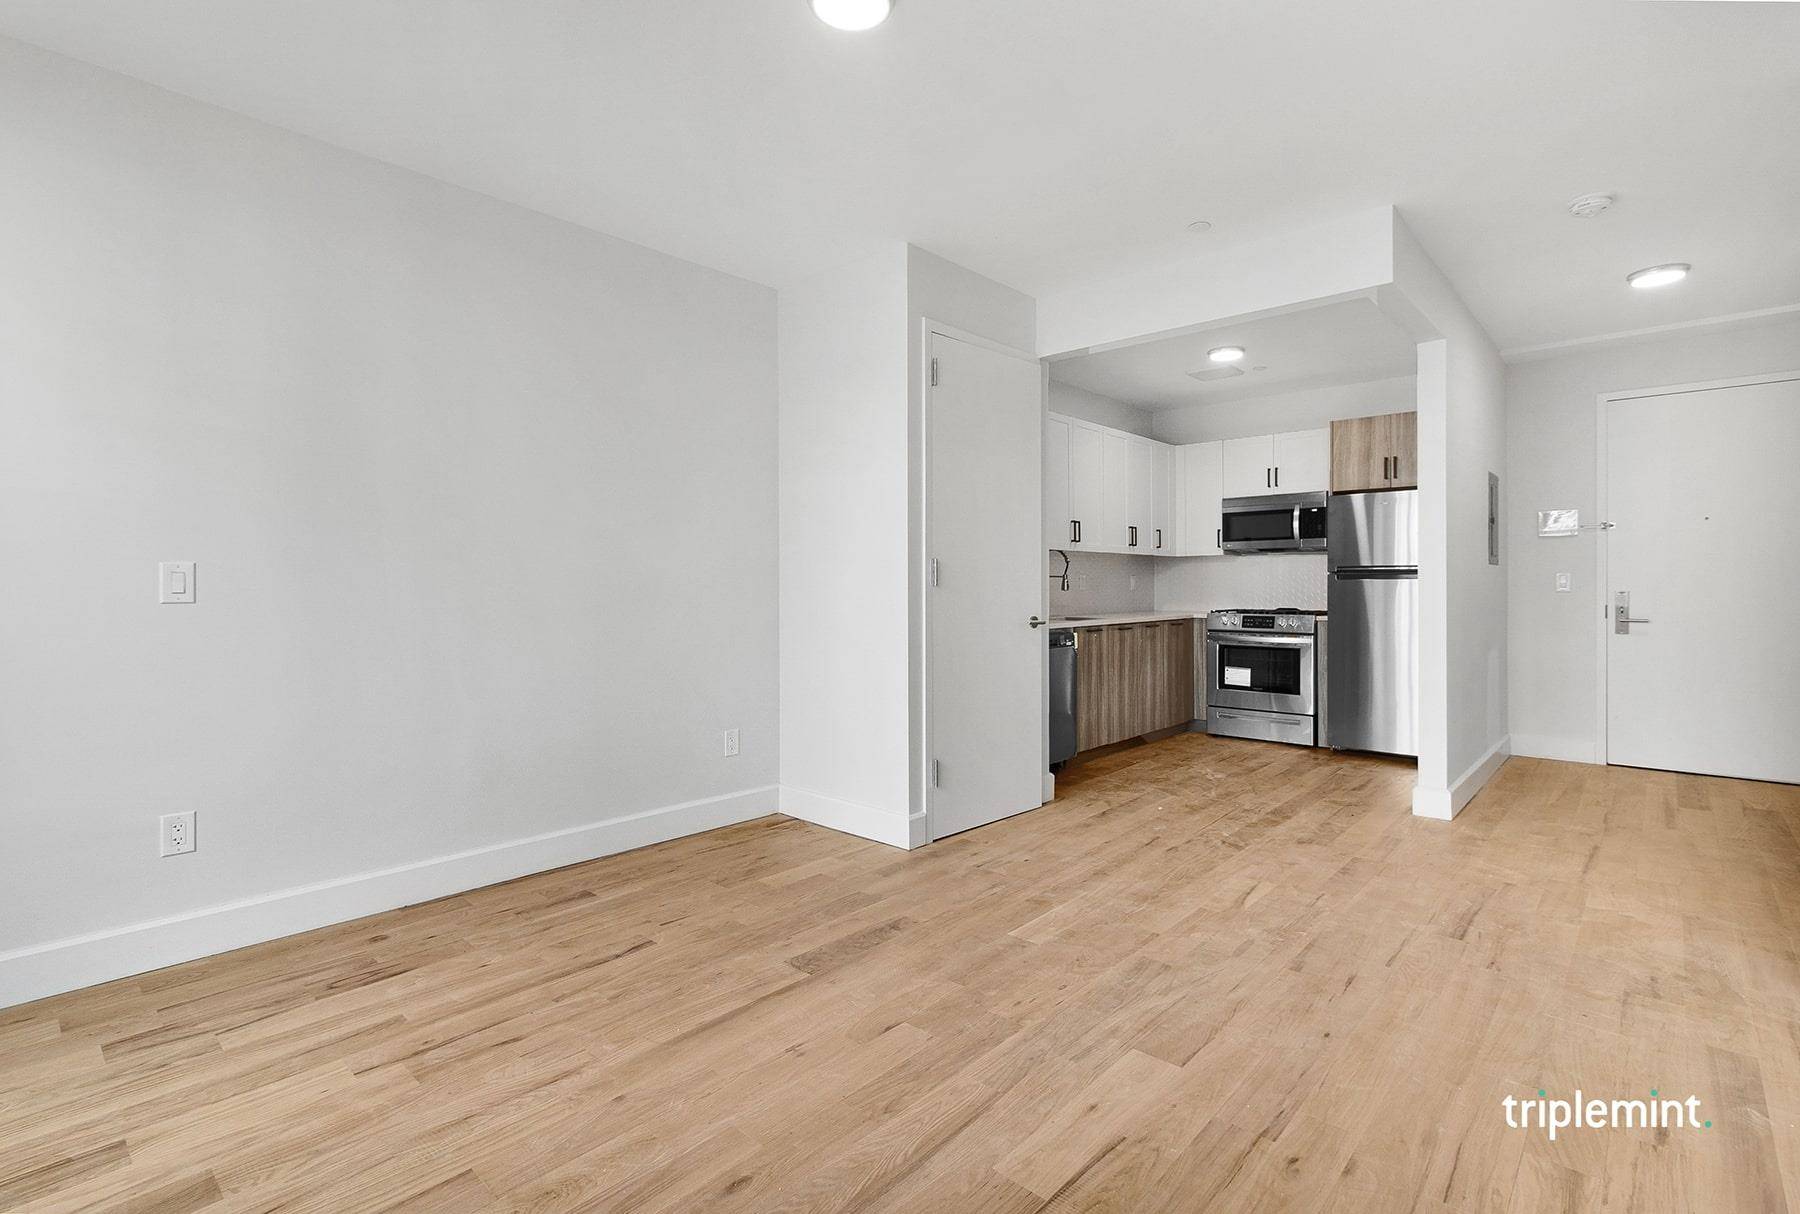 Be the first to live in this phenomenal, luxurious new construction DUPLEX home in vibrant Bushwick !